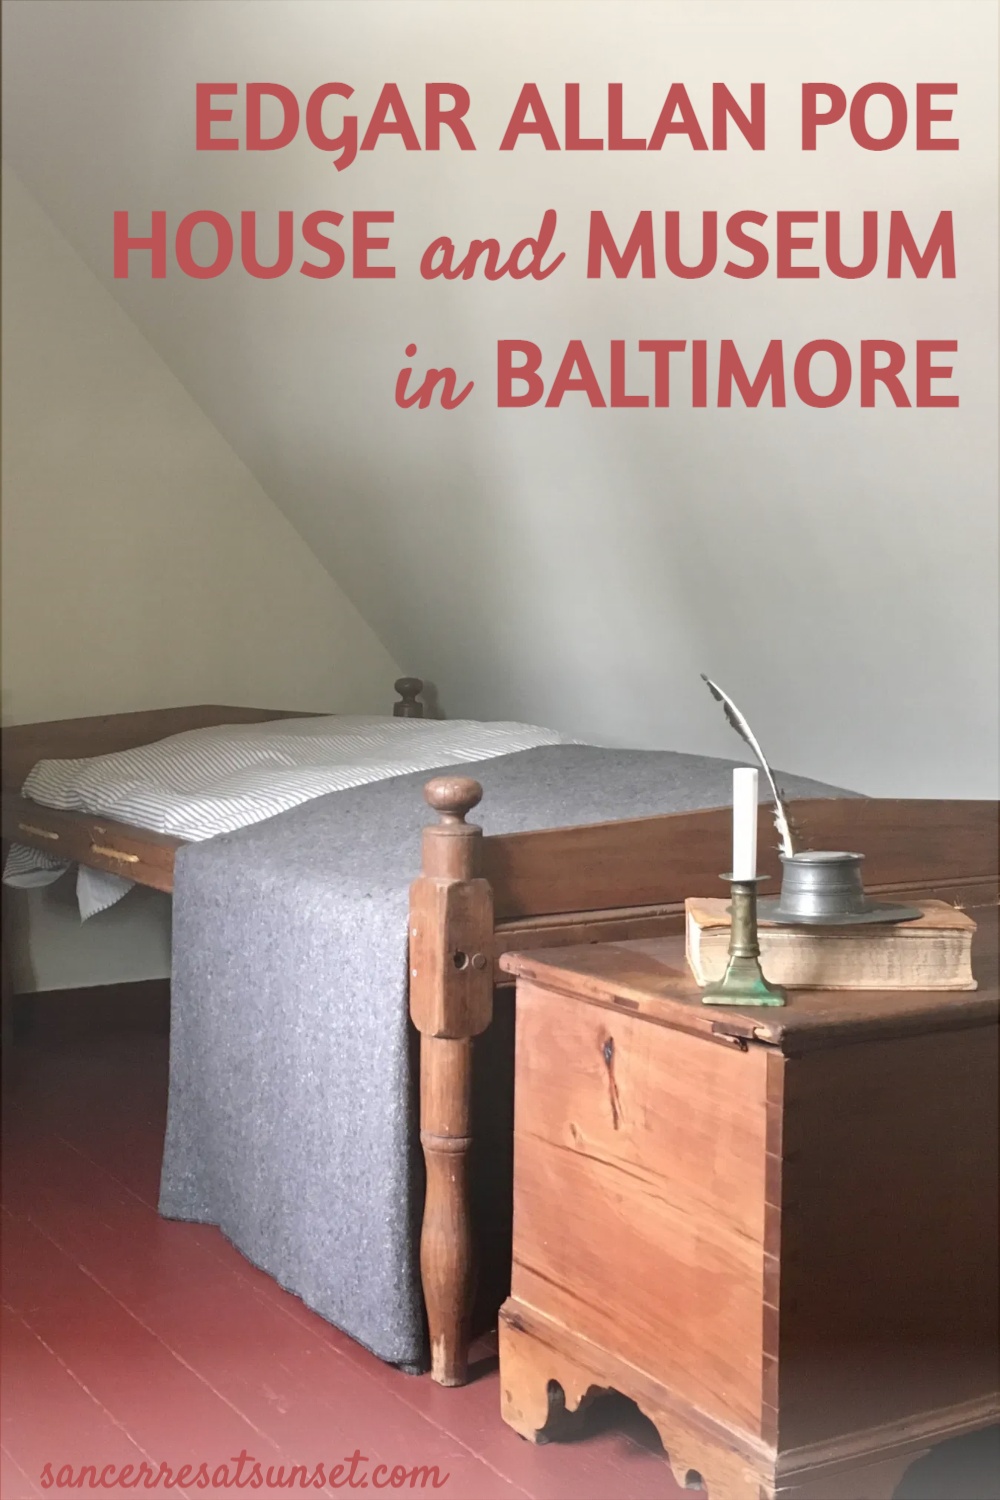 Edgar Allan Poe House and Museum in Baltimore, Maryland